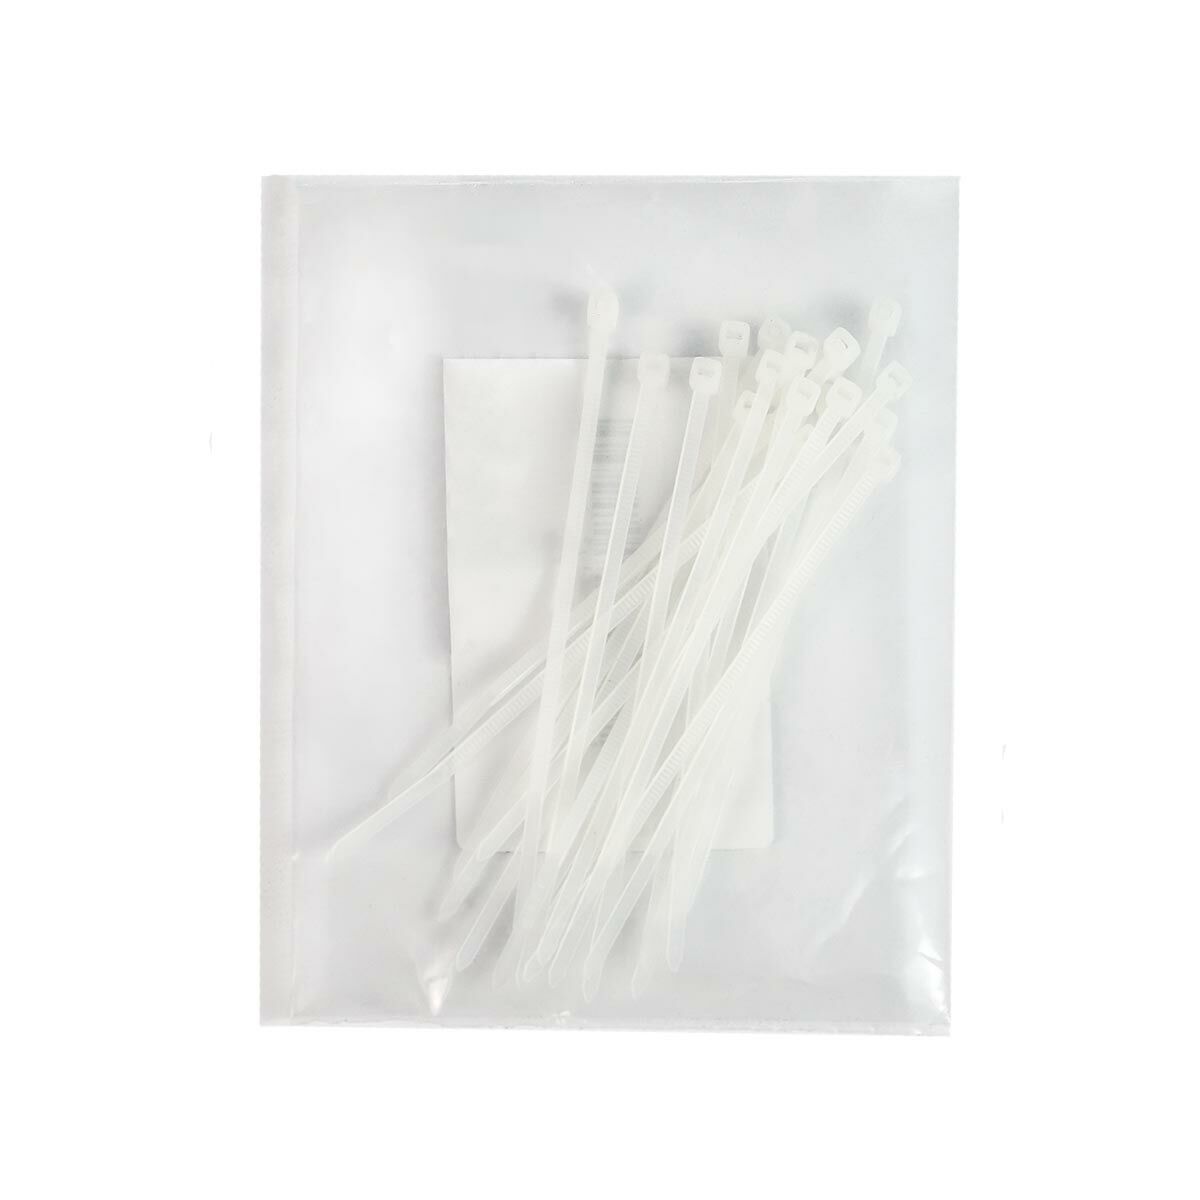 100mm x 2.5mm White Cable Ties, 20pcs image 4